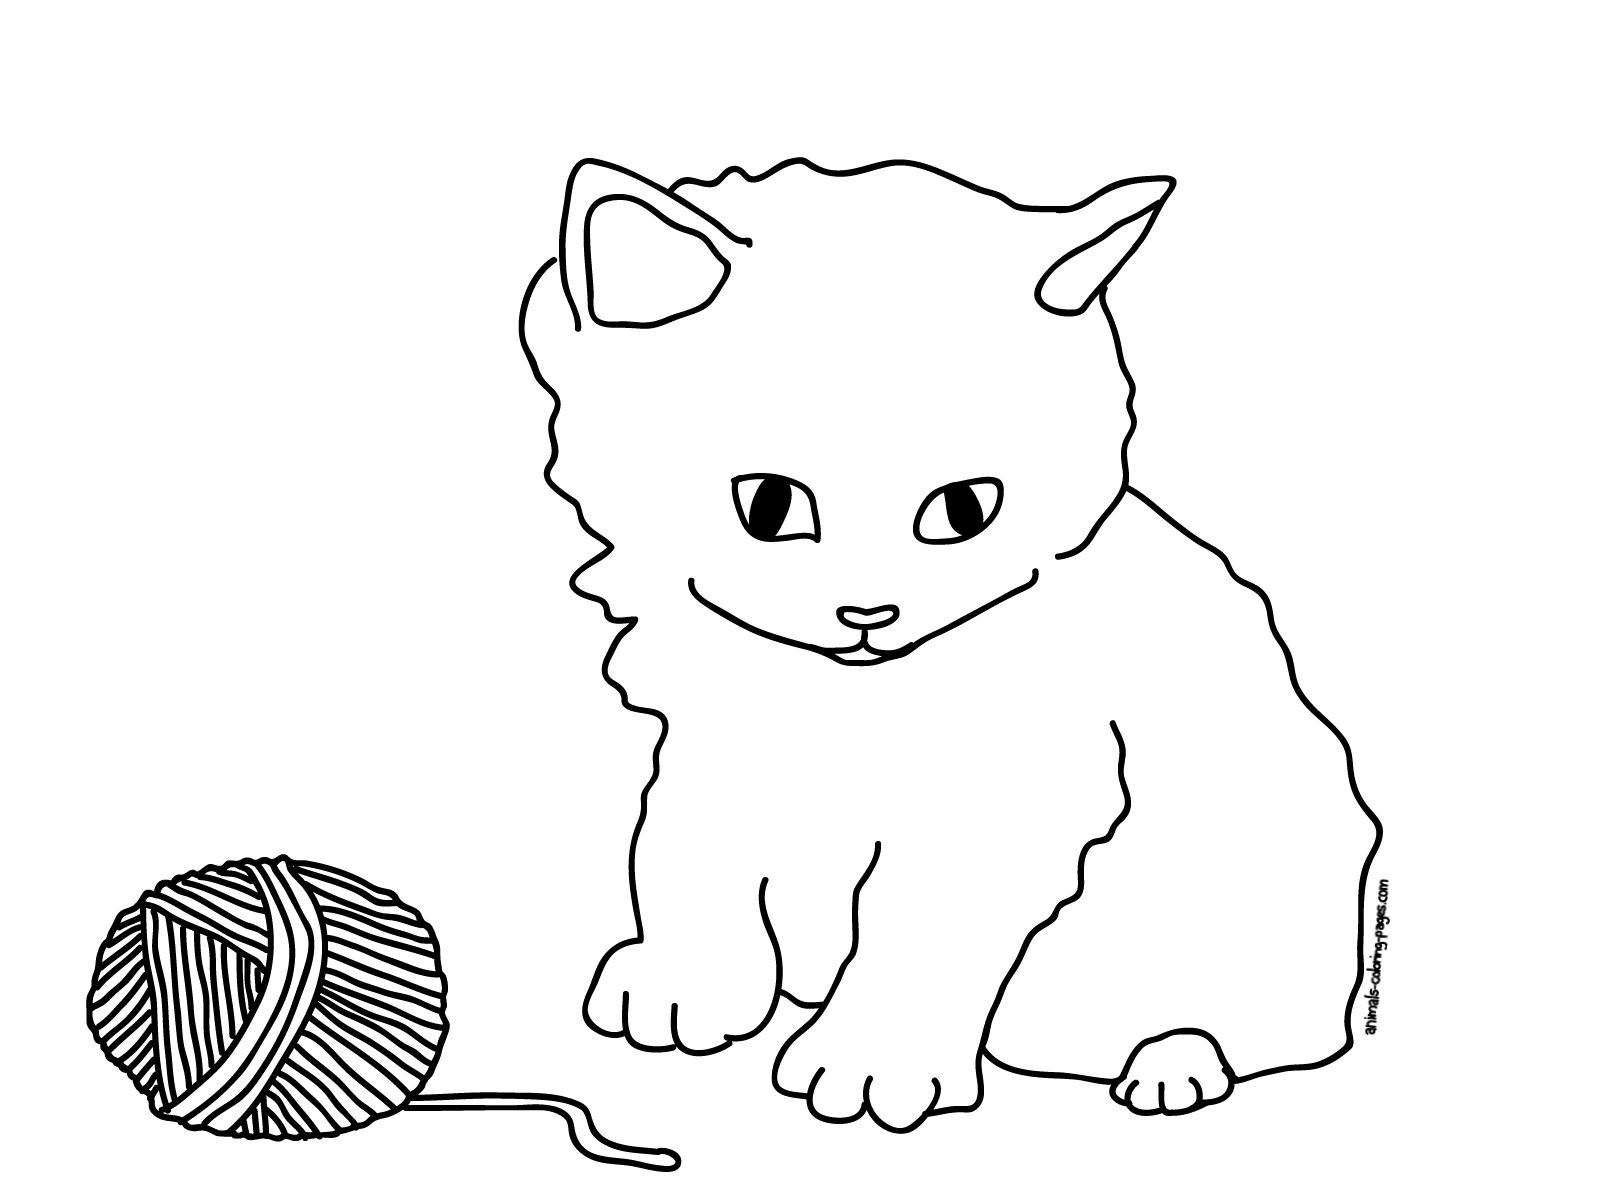 cat picture to color coloring pages cats and kittens coloring pages free and to color picture cat 